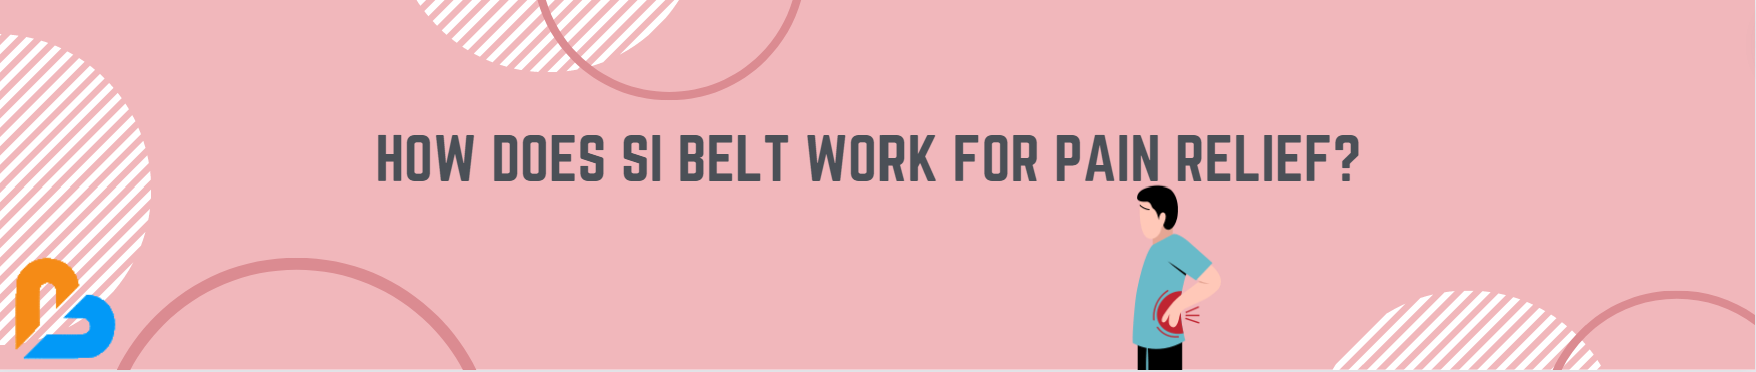 How does SI belt work for pain relief?